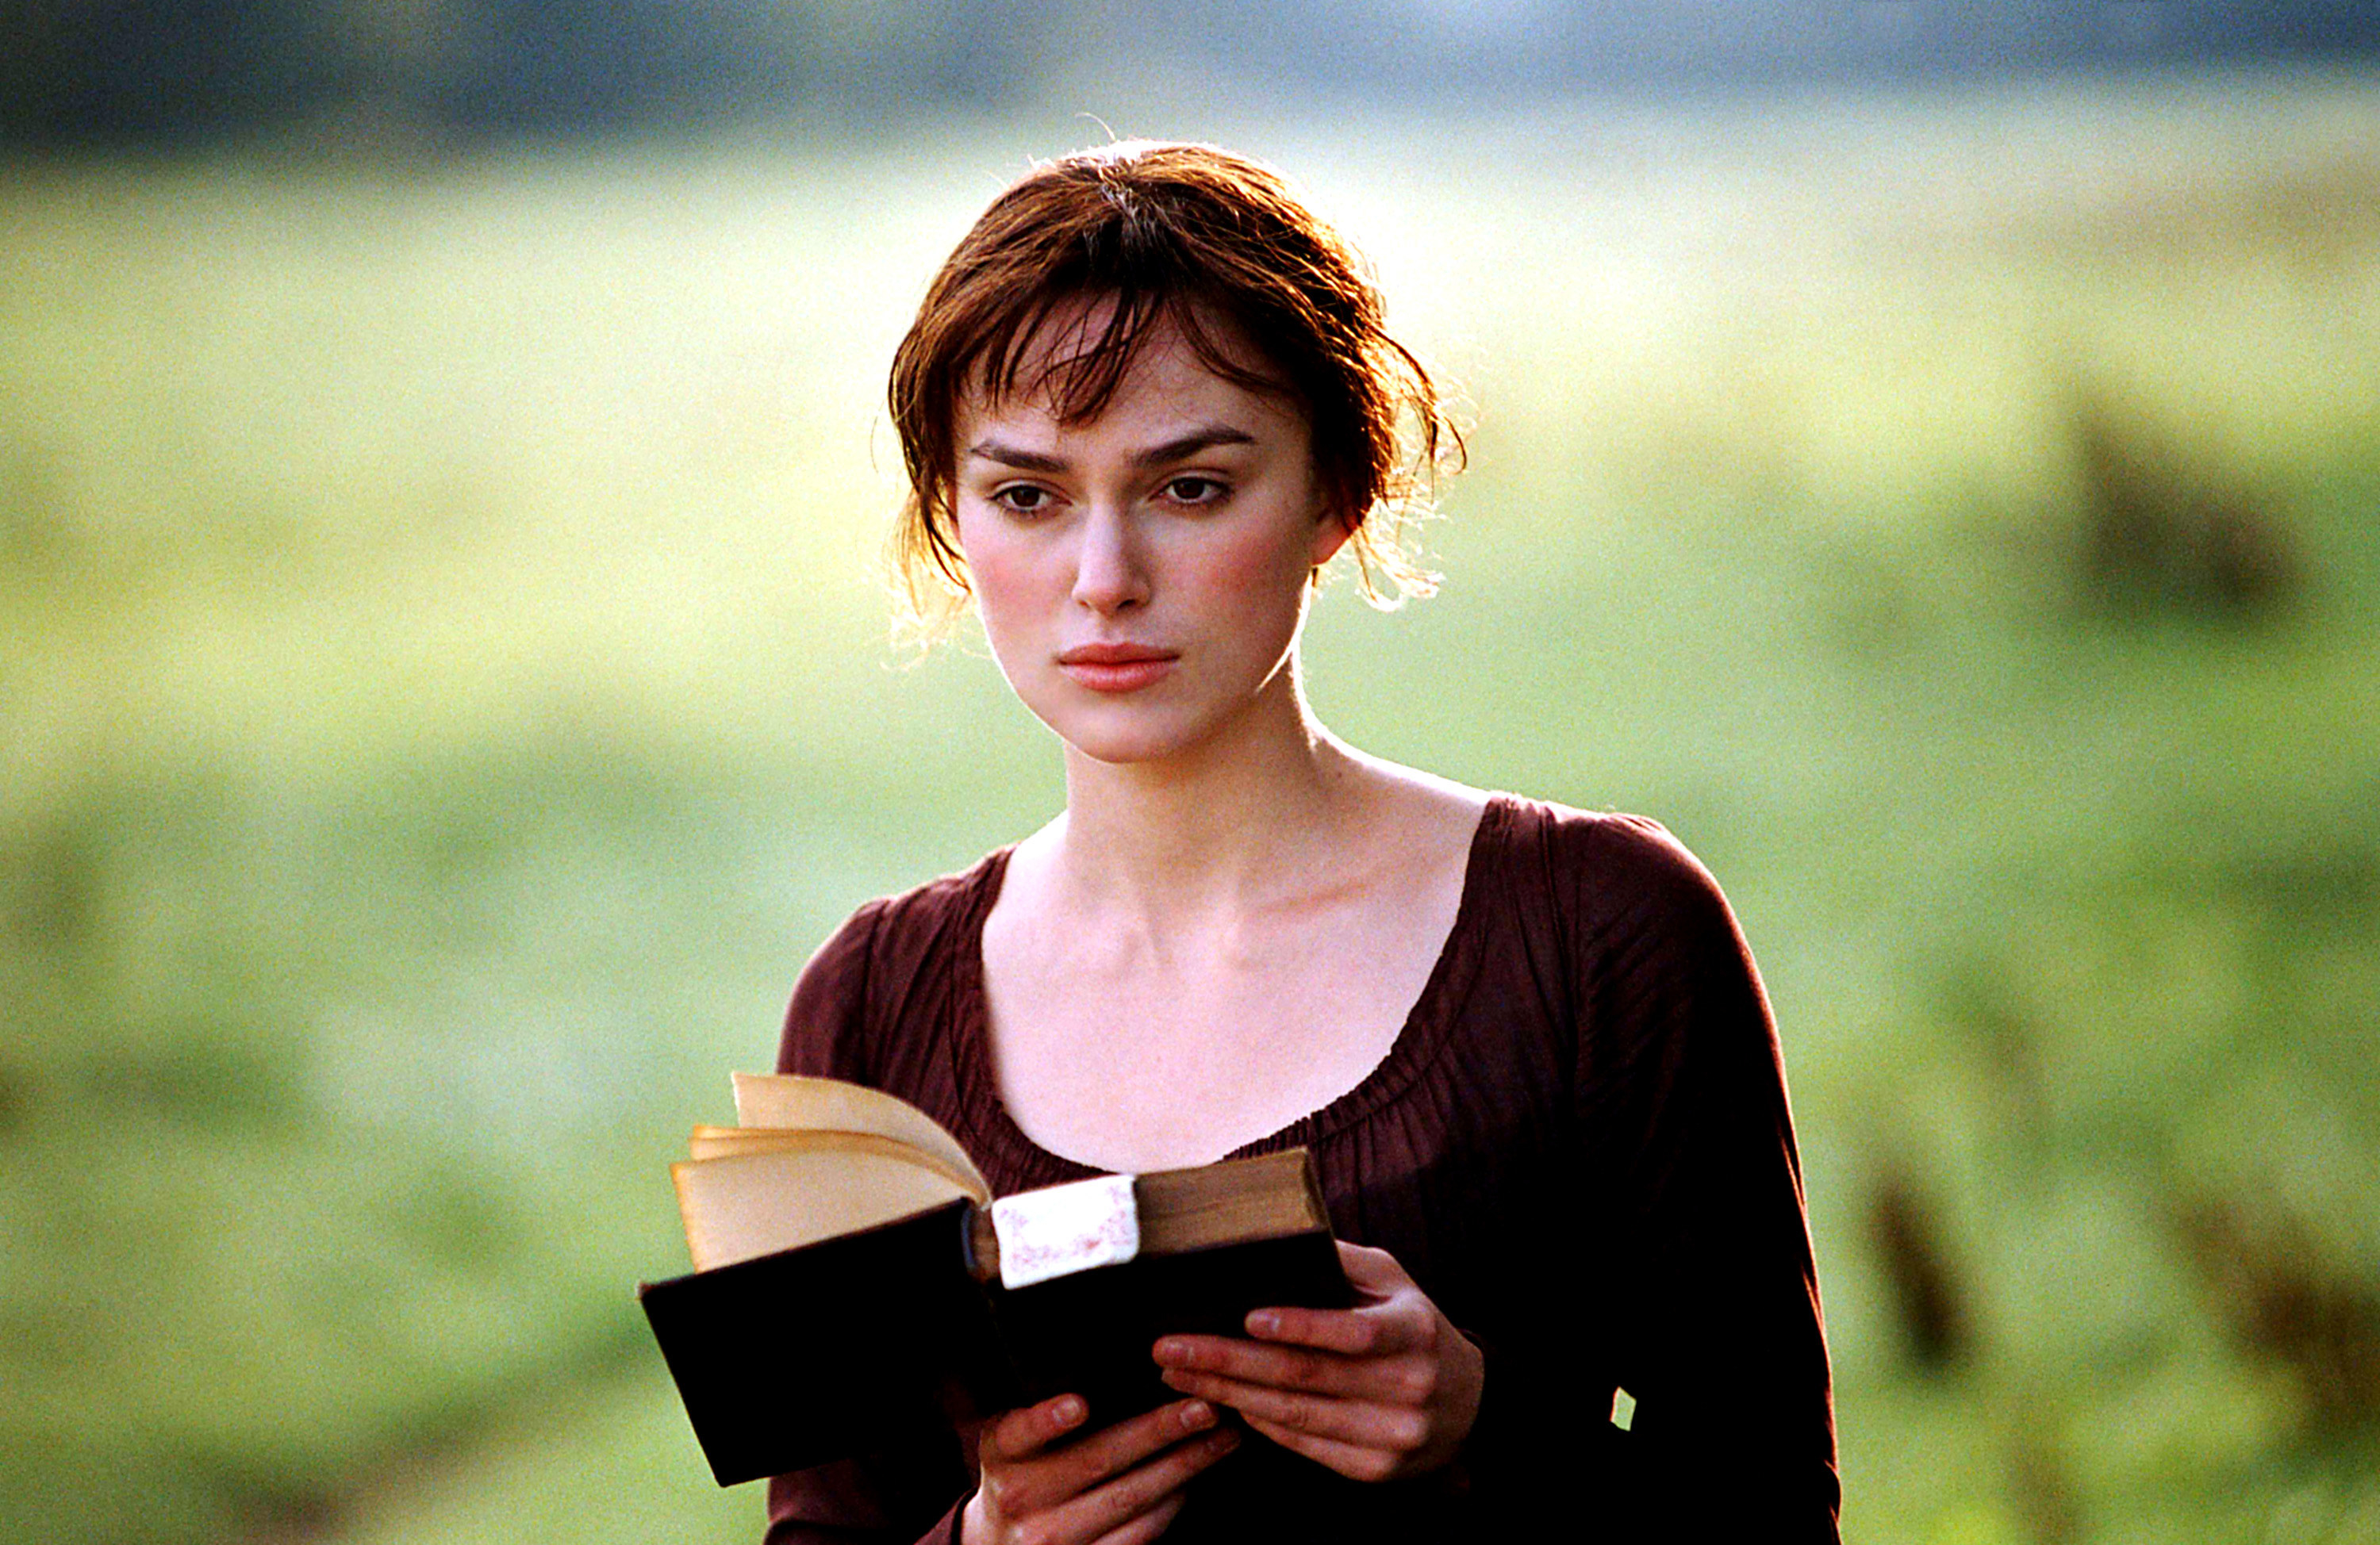 Elizabeth Bennett holds out a book while standing in a field